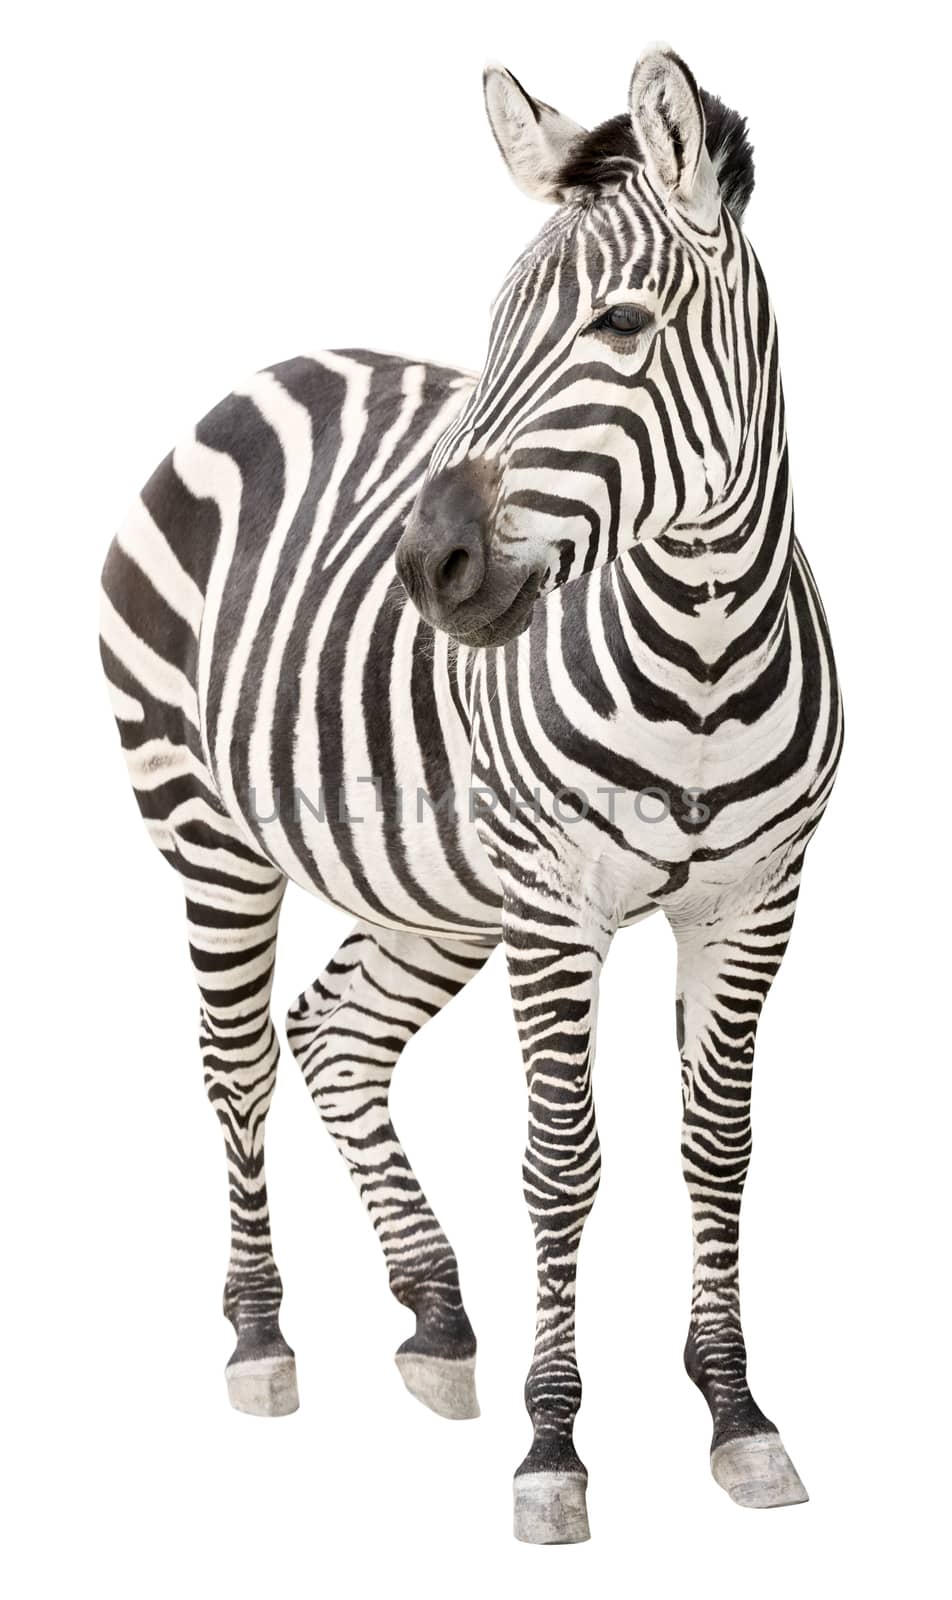 Zebra pregnant front view looking cutout by vkstudio